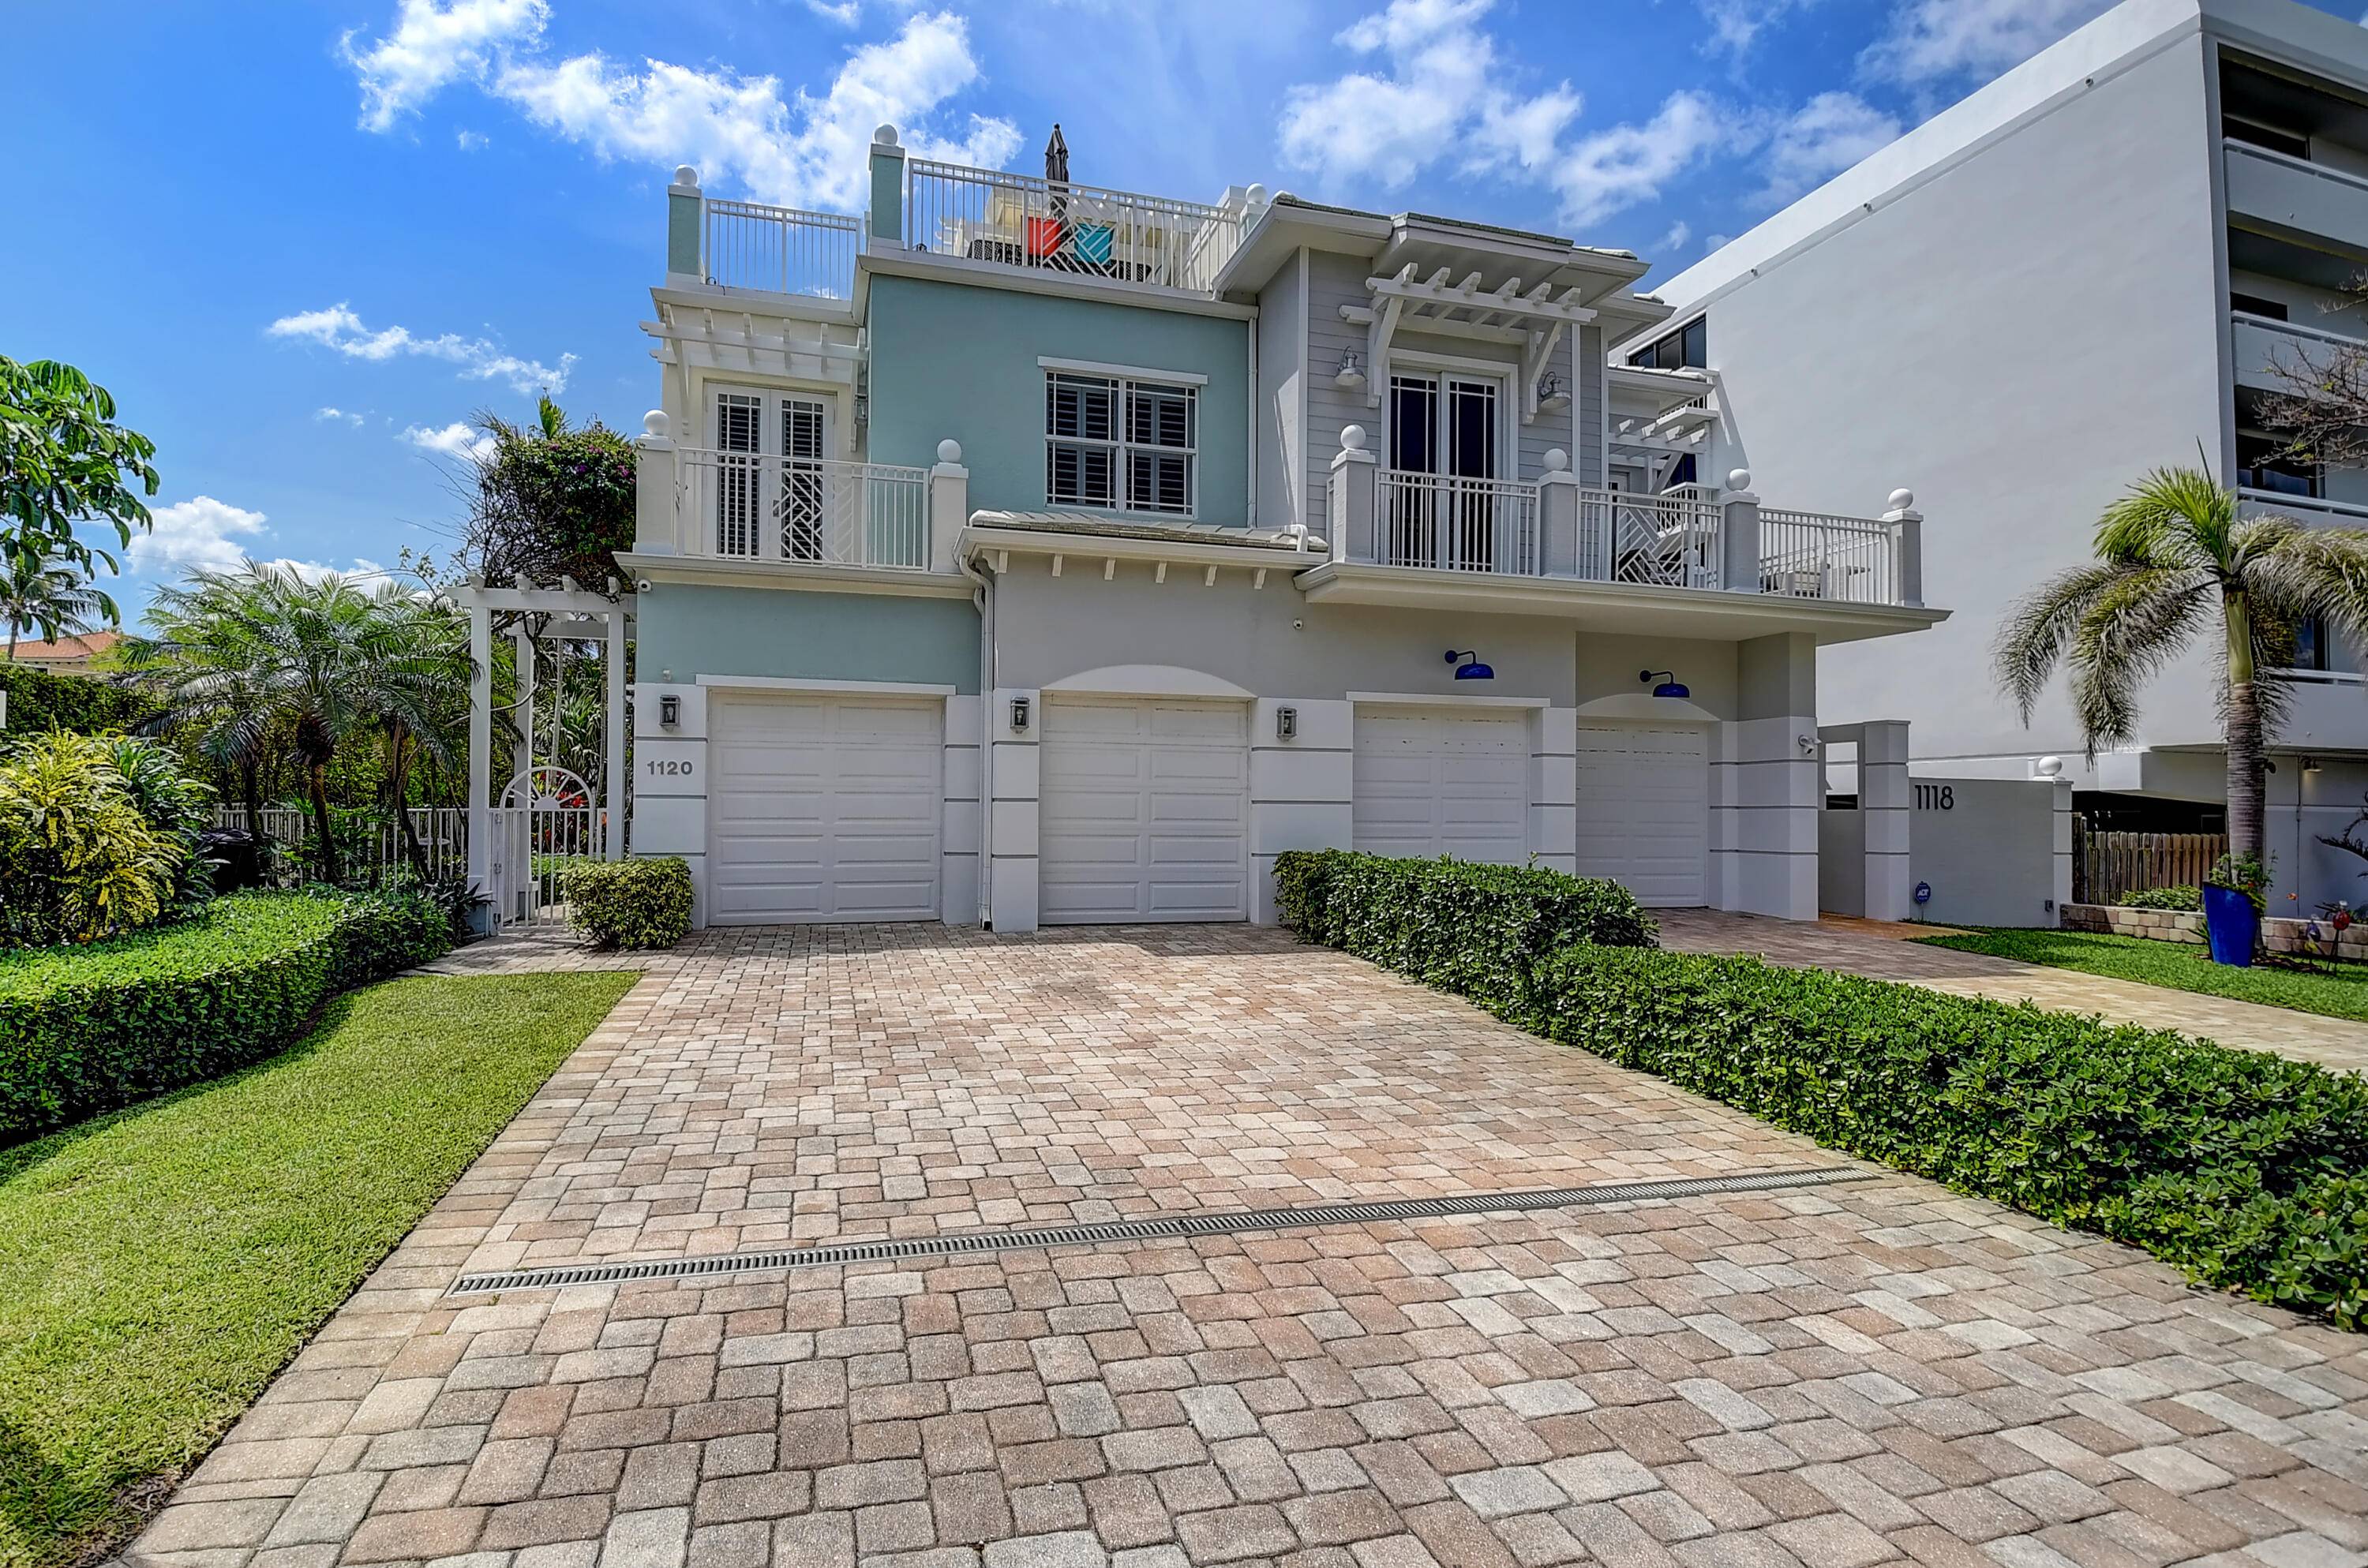 WELCOME TO PARADISE ! Turn key, contemporary coastal townhome in the heart of Delray's sought after Seagate neighborhood, steps to the sand and a short walk to Downtown Delray Beach's ...